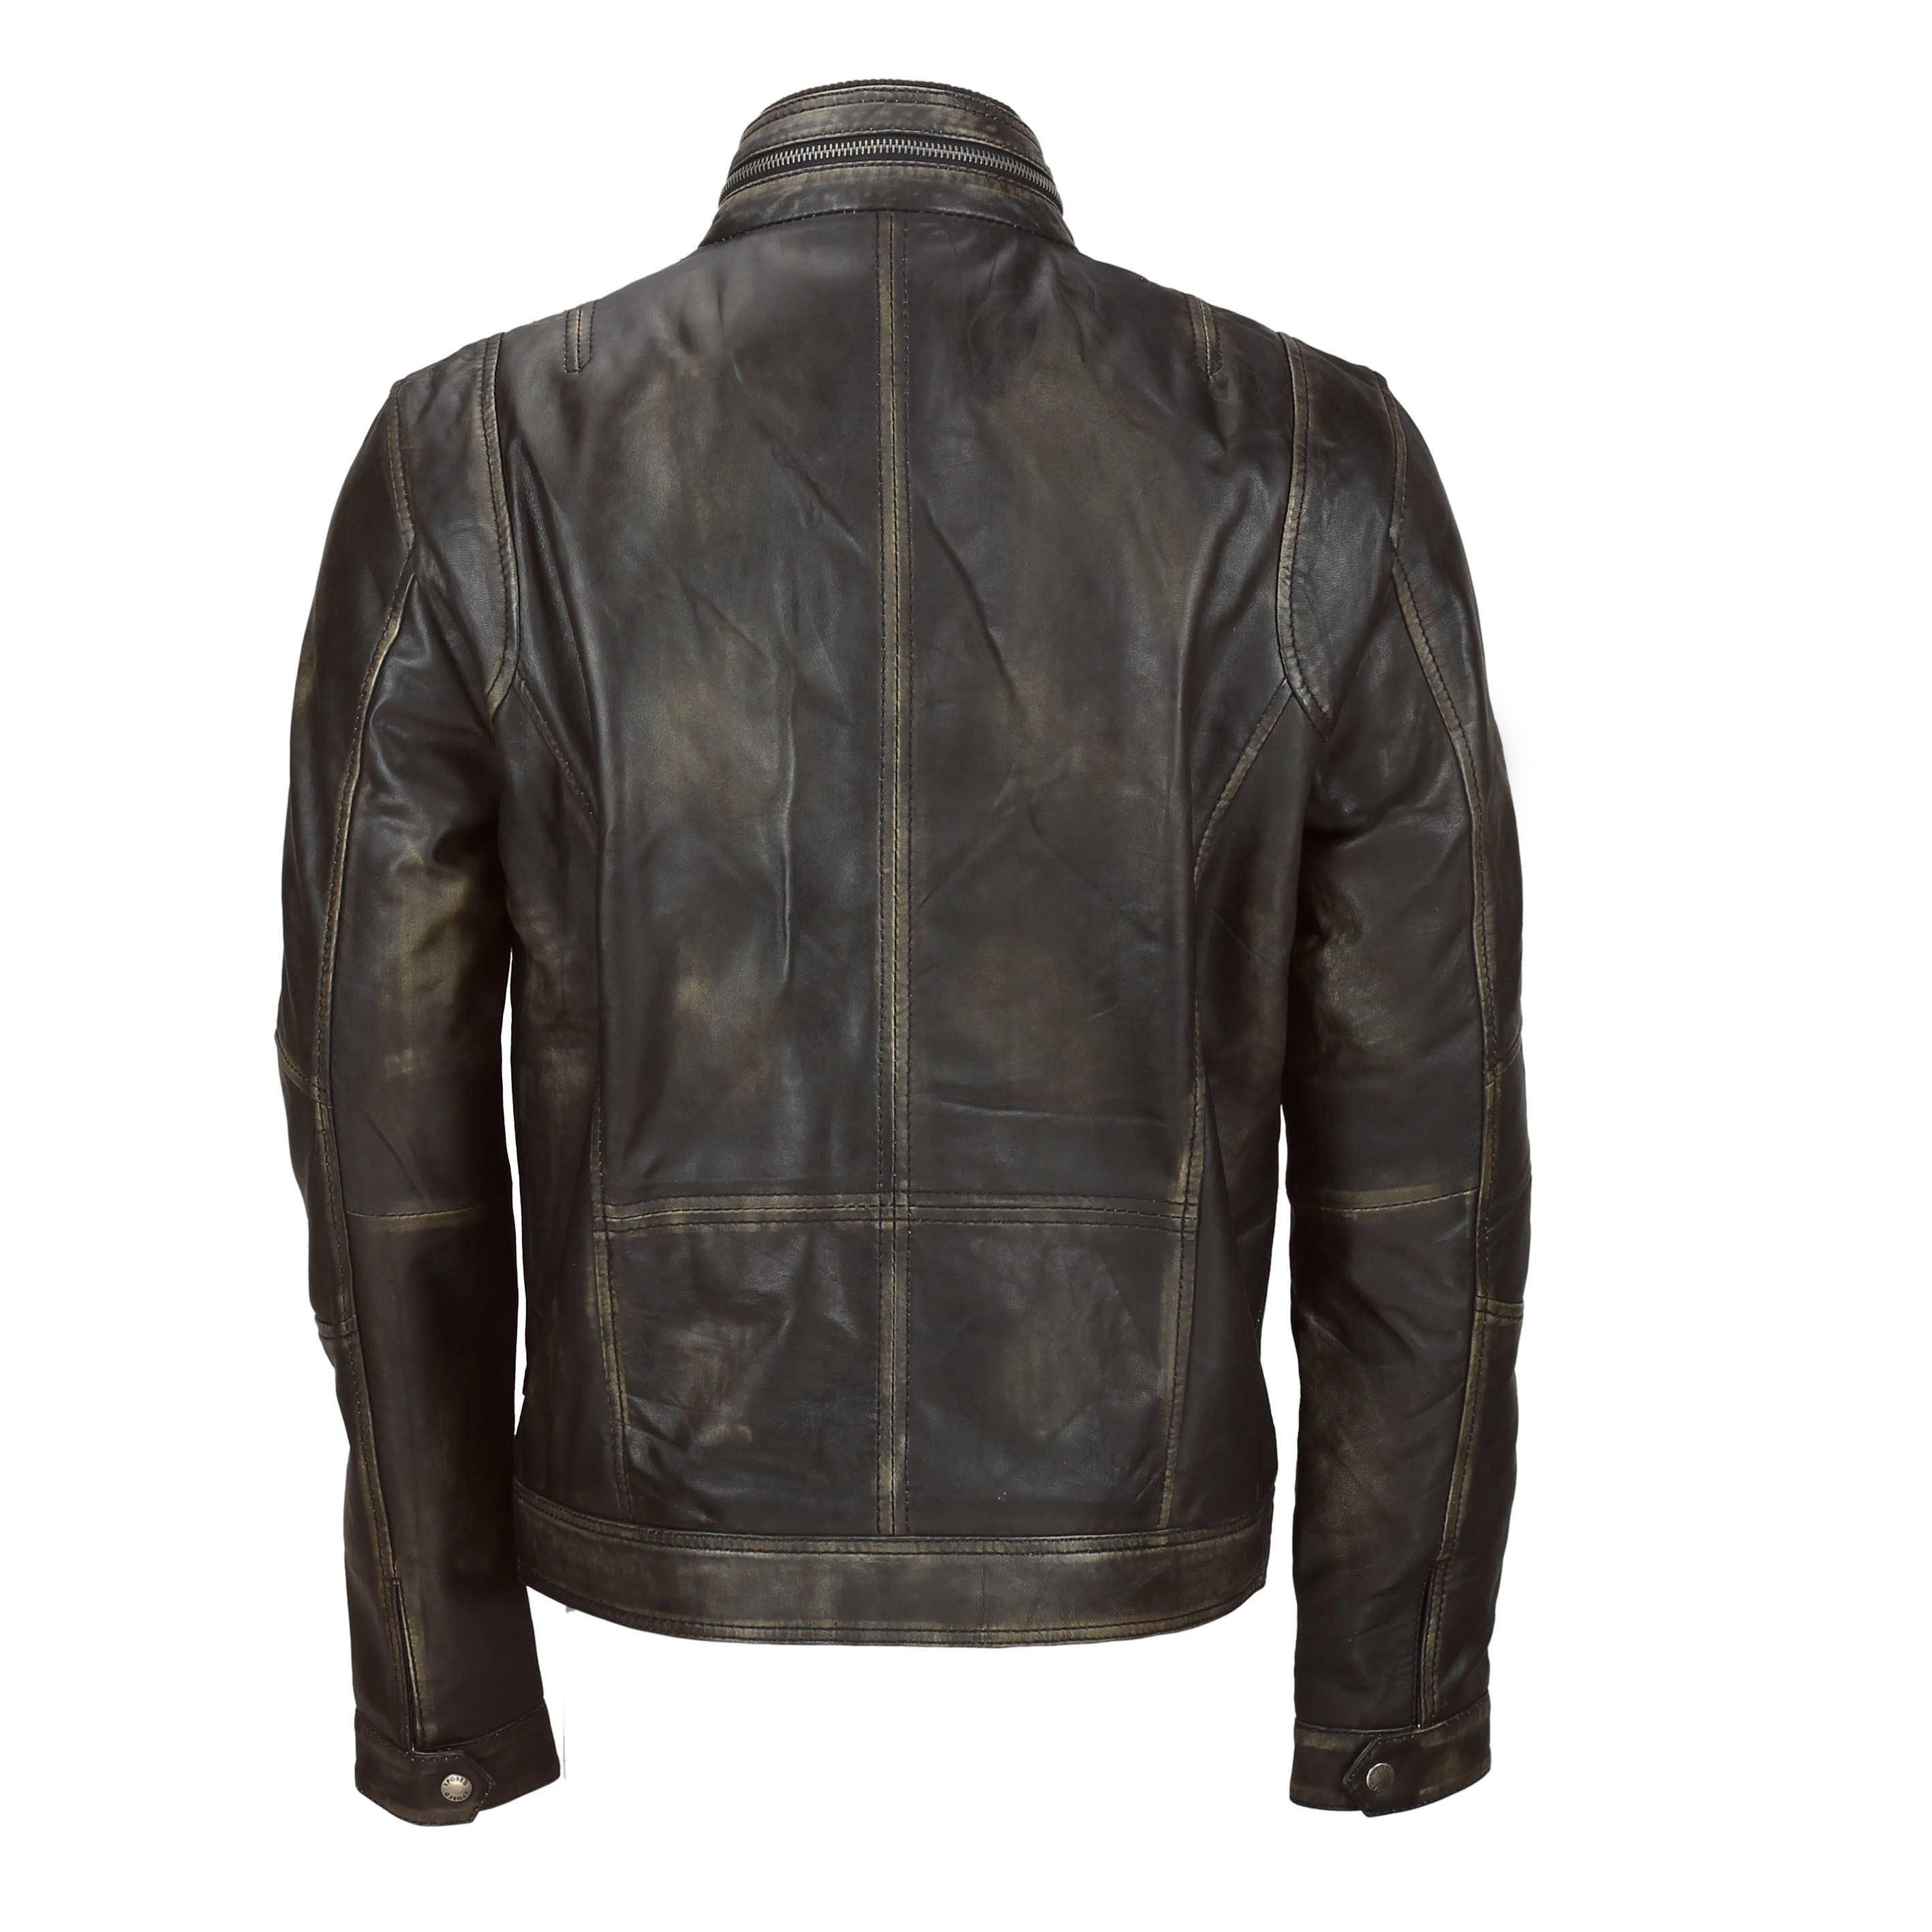 Mens Vintage Rub Off Real Leather Biker Jacket Smart Casual Retro Military Style